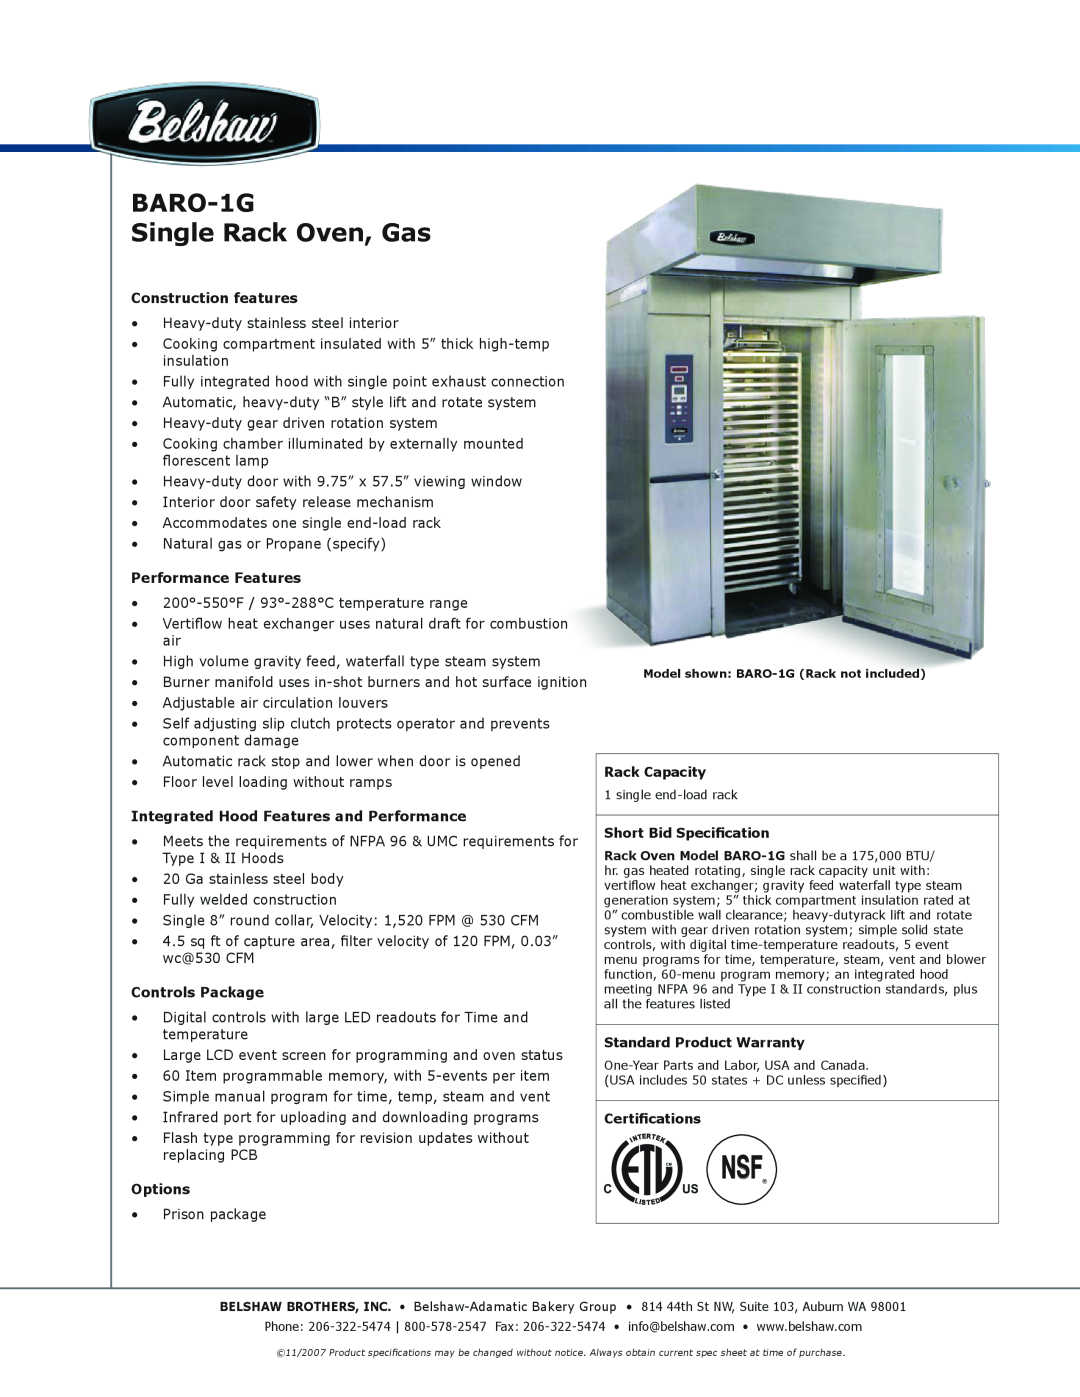 Belshaw Brothers BARO-1G warranty Construction features, Performance Features, Integrated Hood Features and Performance 